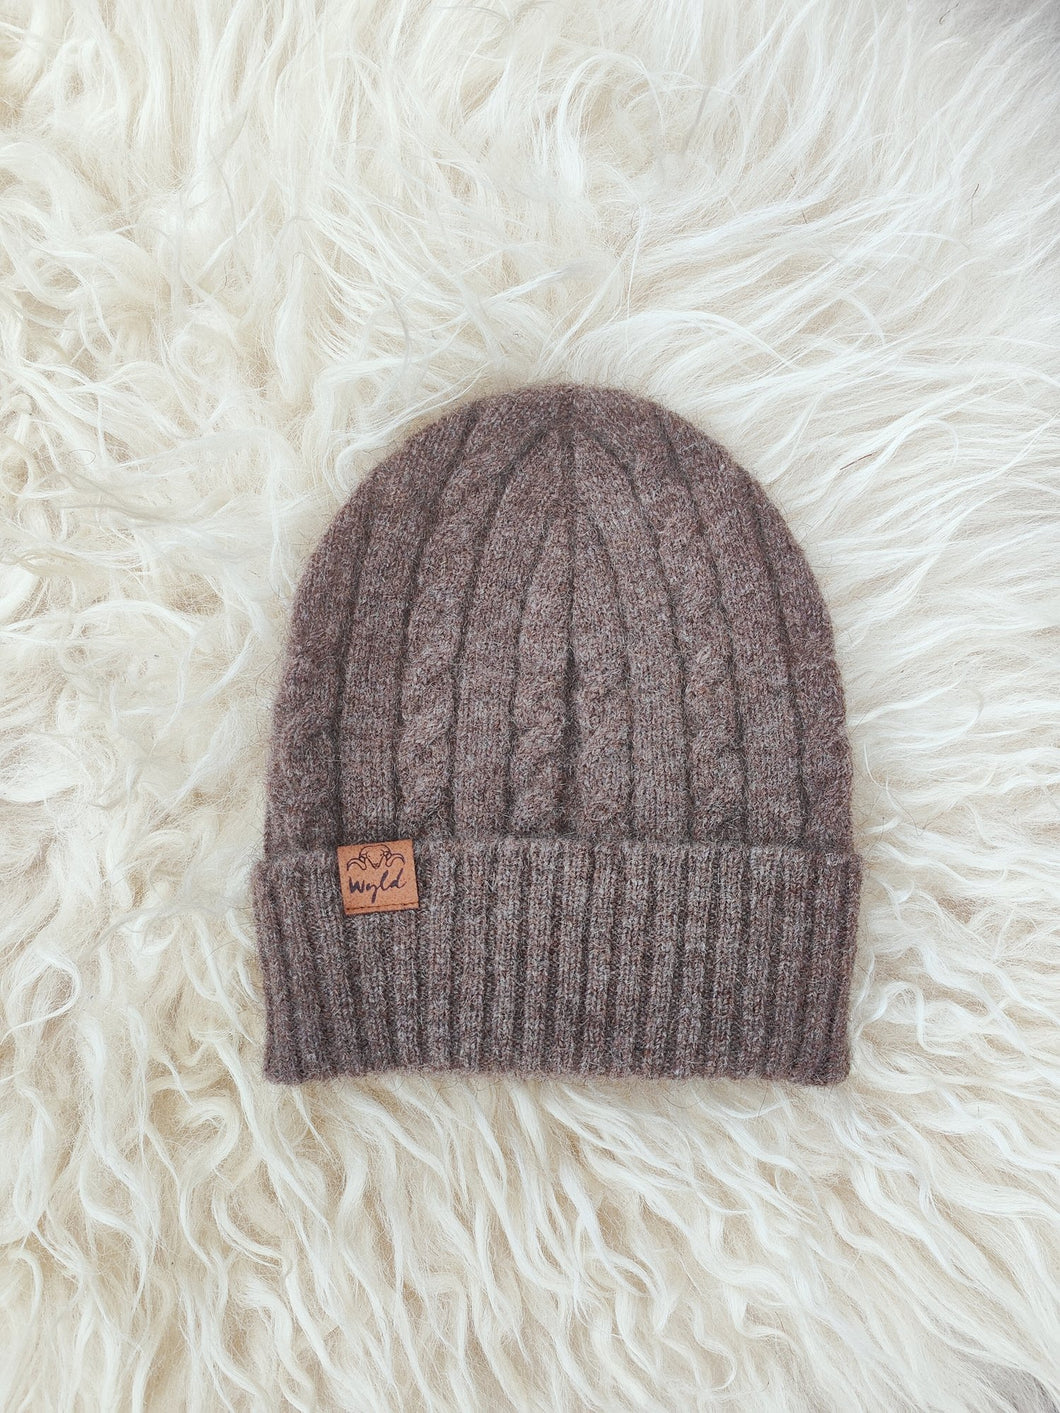 Wyld Hat - Naked Cosy Beanie  - One Size